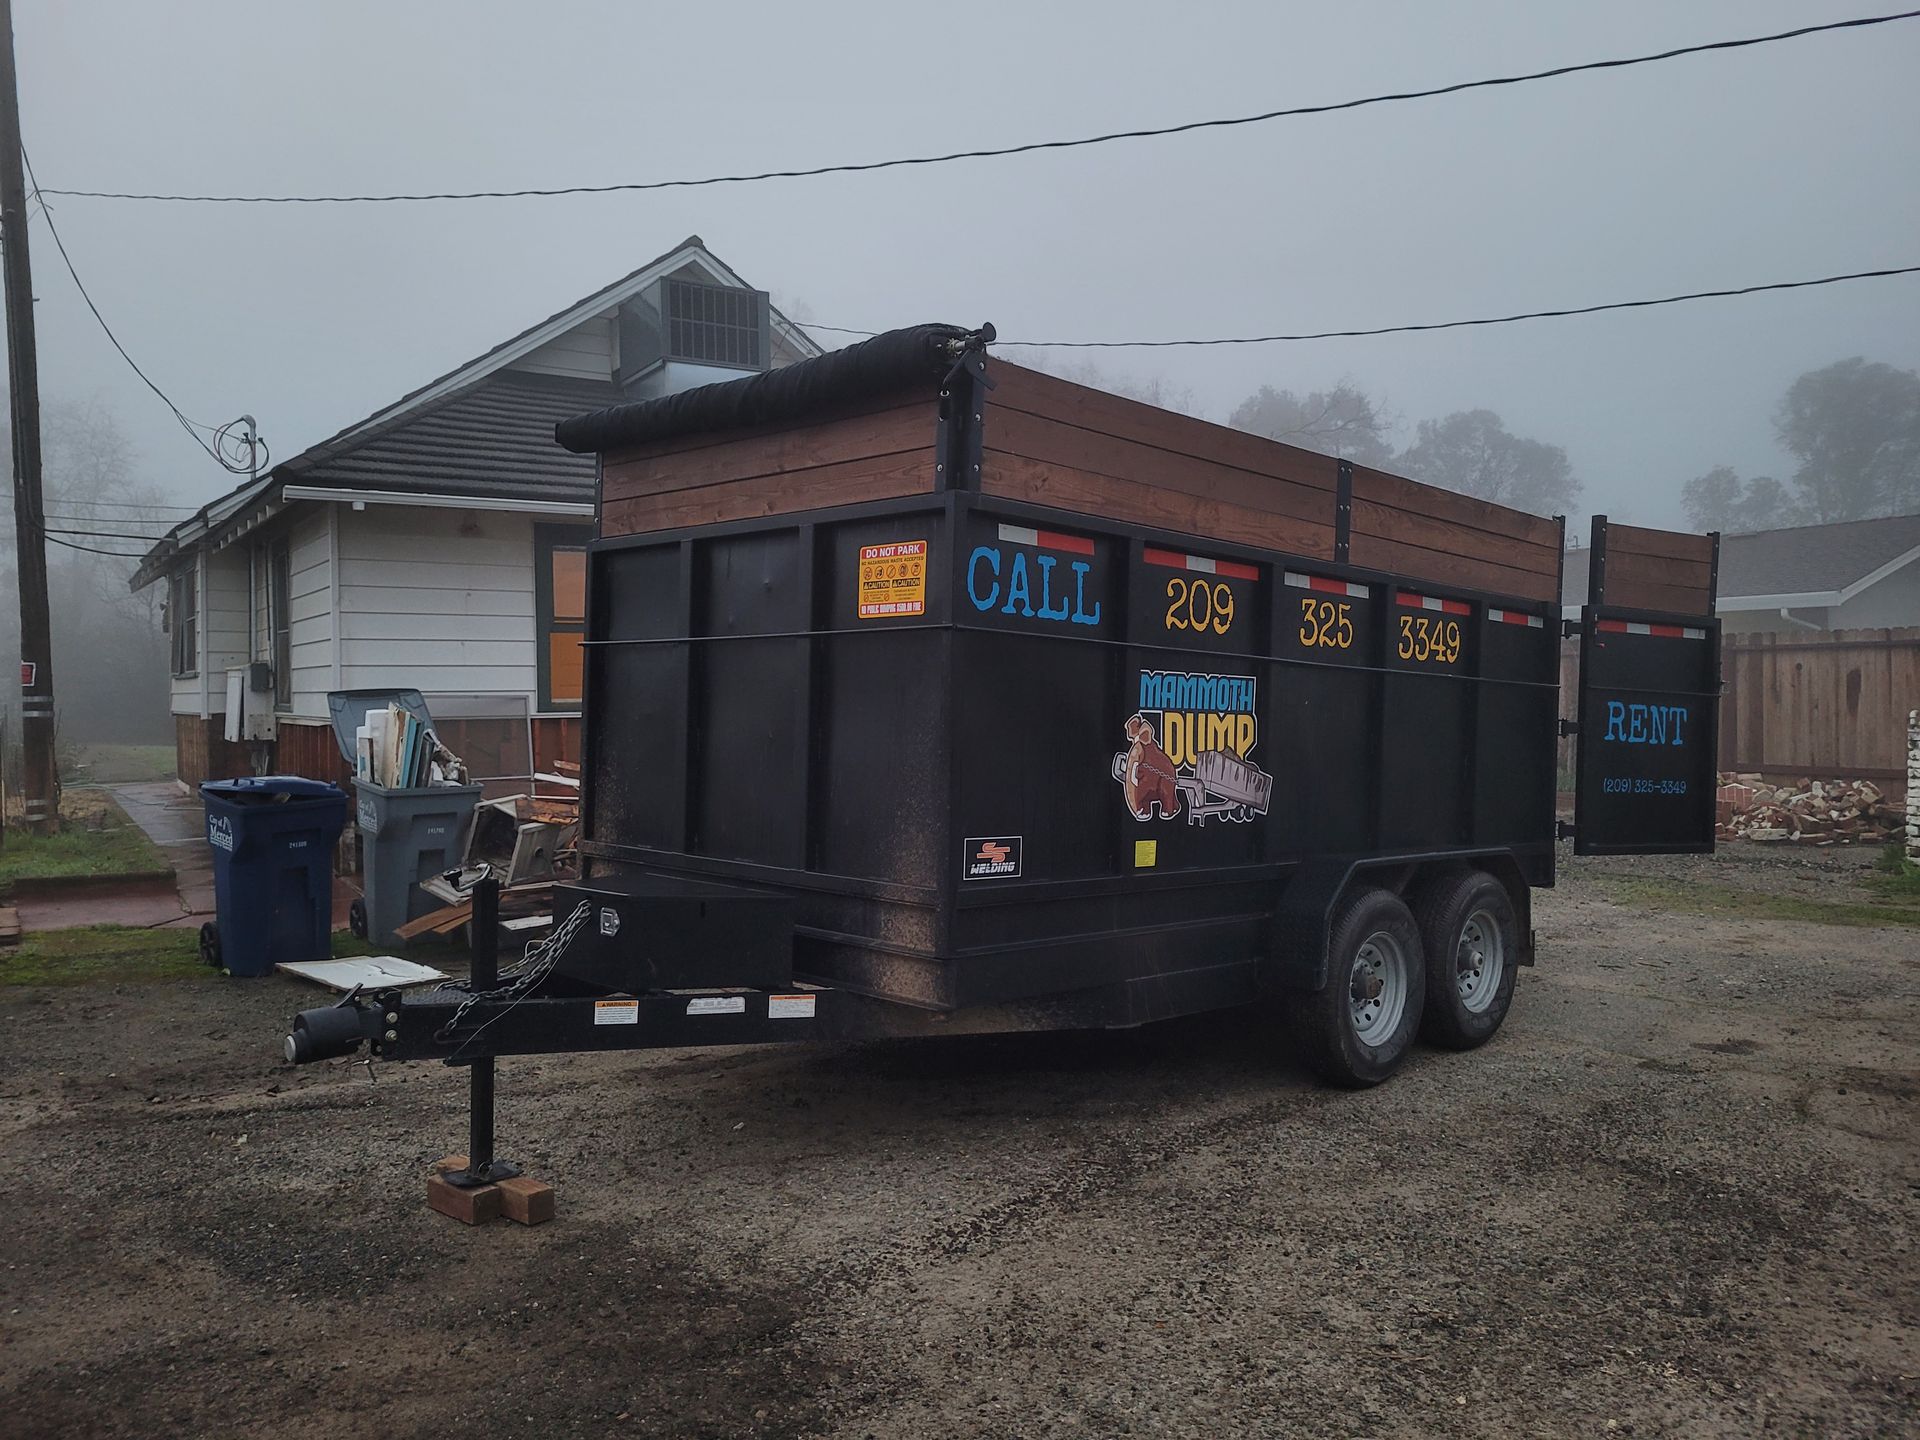 20 yard dumpster in front of residential home